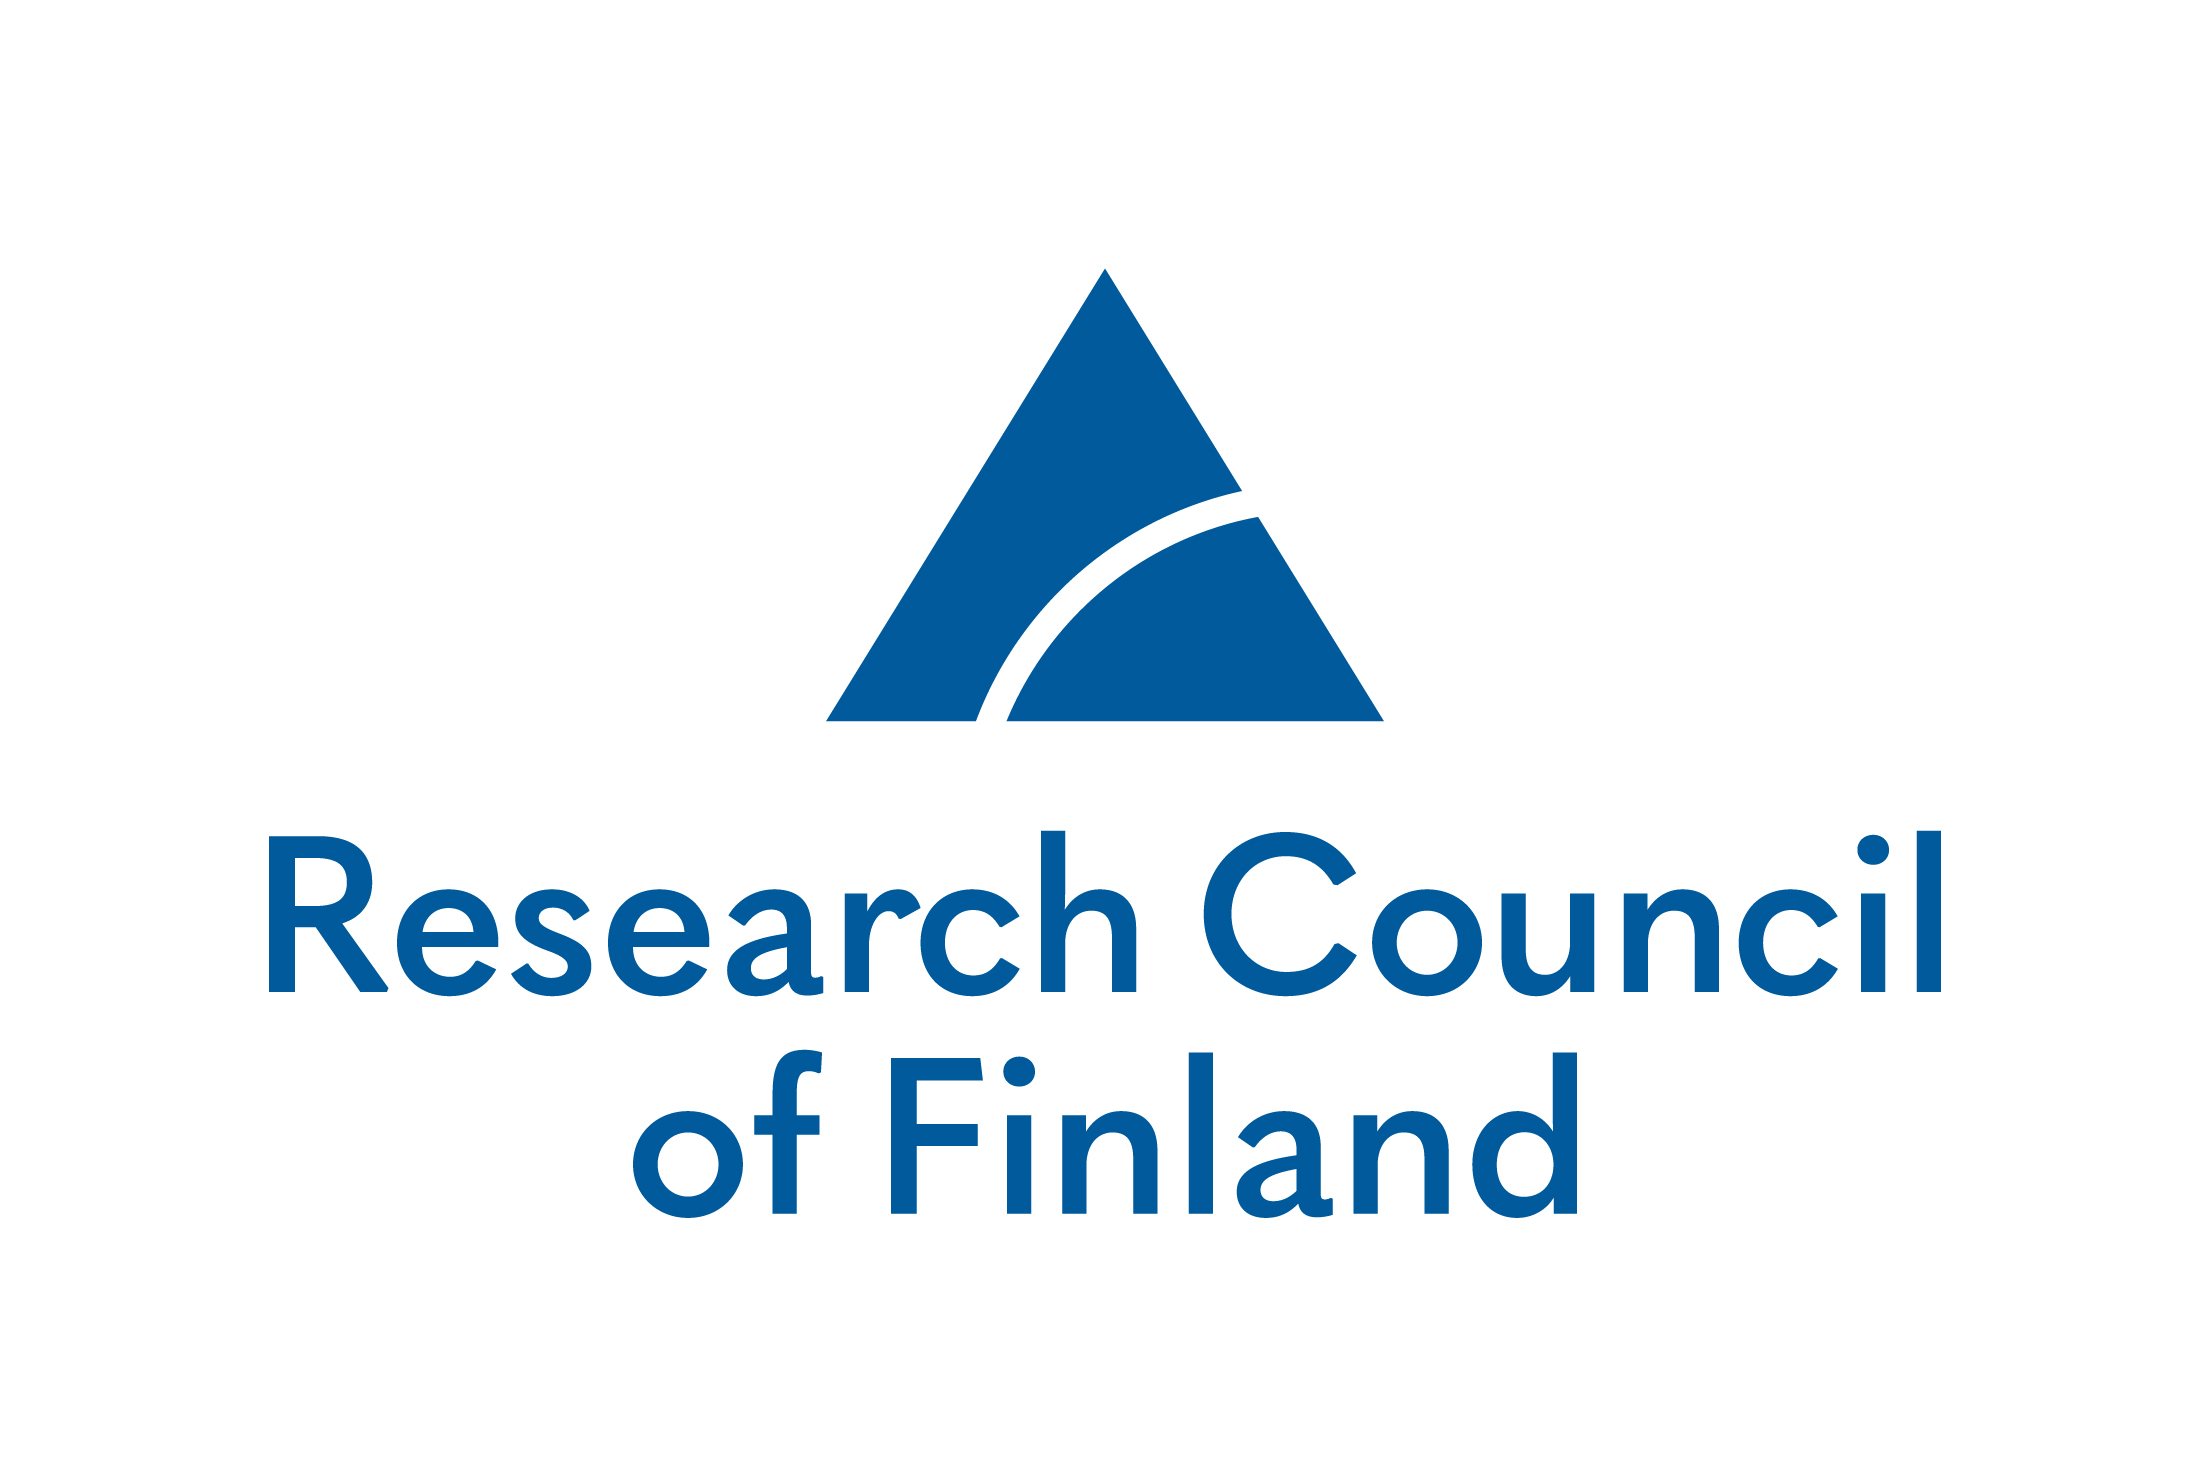 Blue logo of the Research Council of Finland.